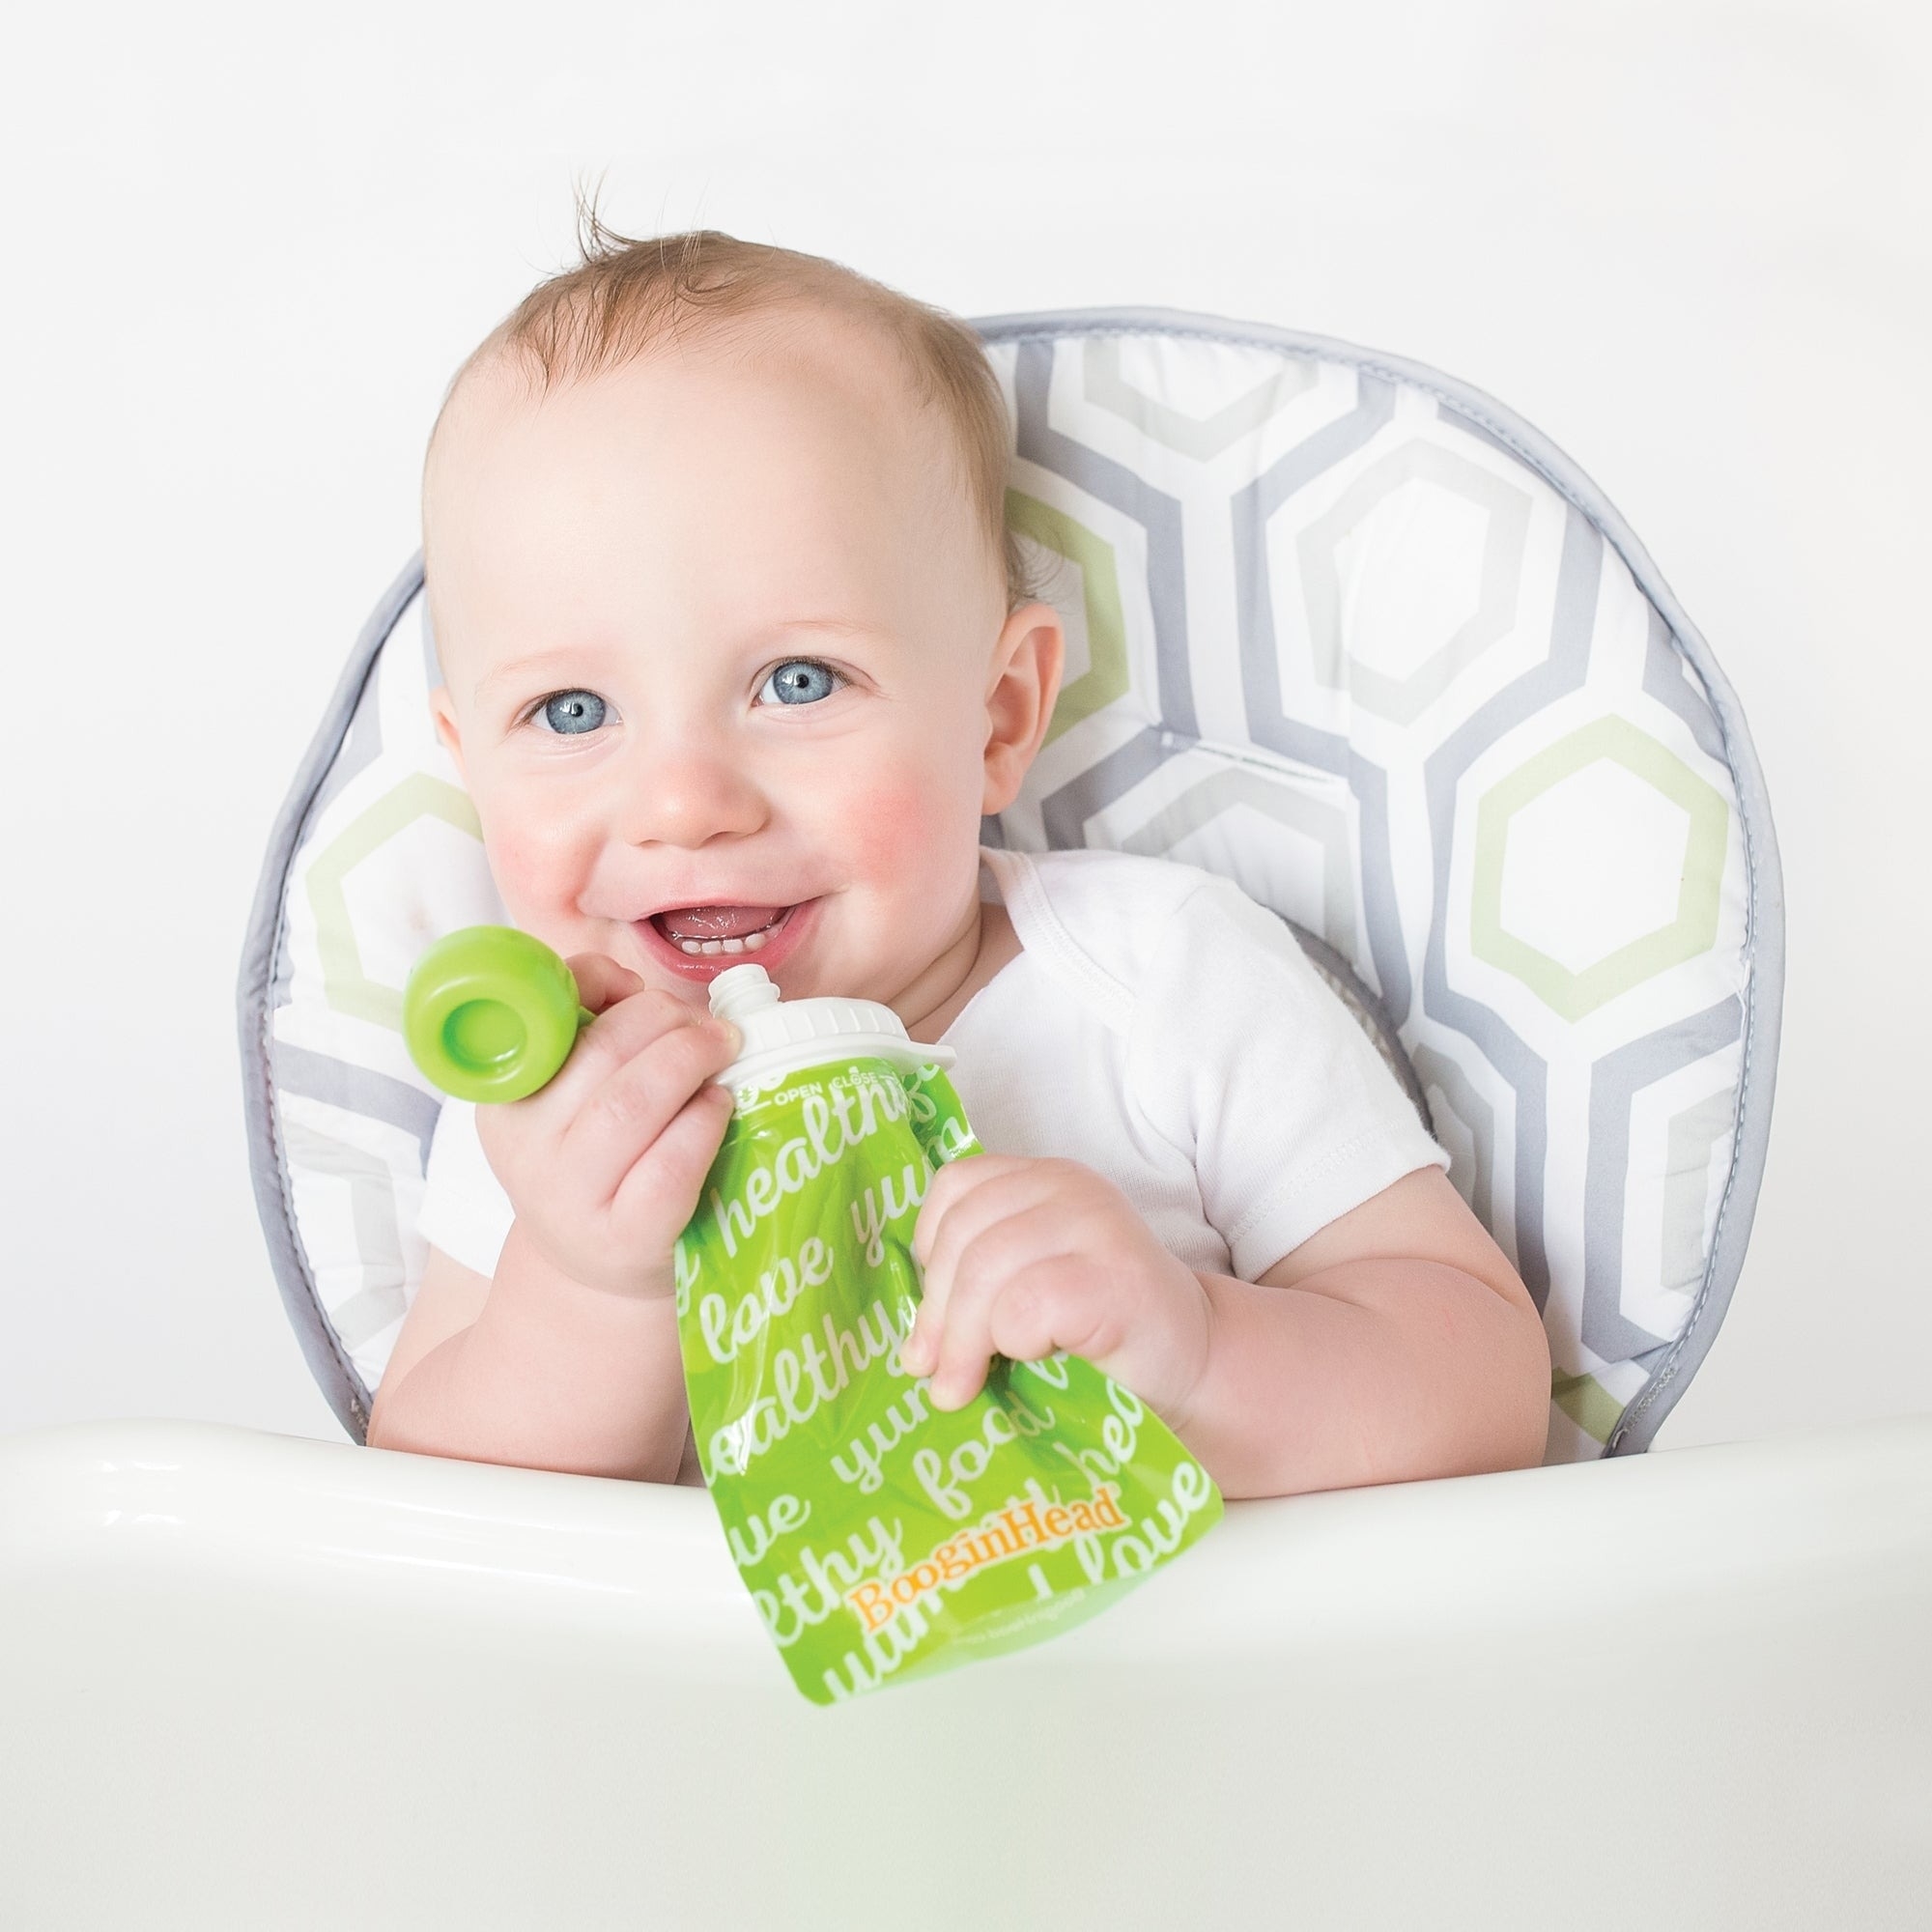 Baby uses a reusable food pouch